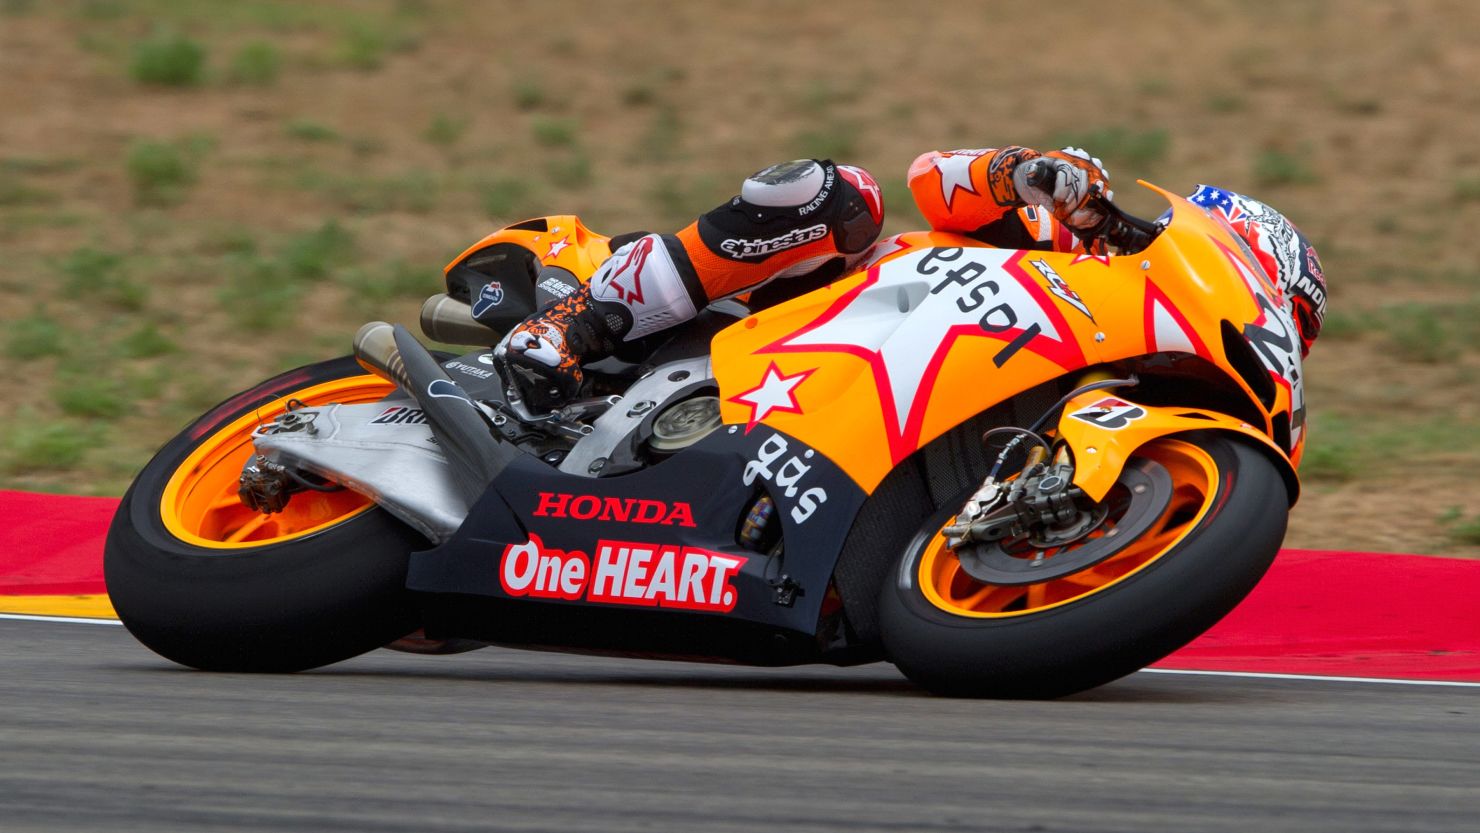 Honda rider Casey Stoner is on track to defend his Japan Grand Prix title on Sunday.